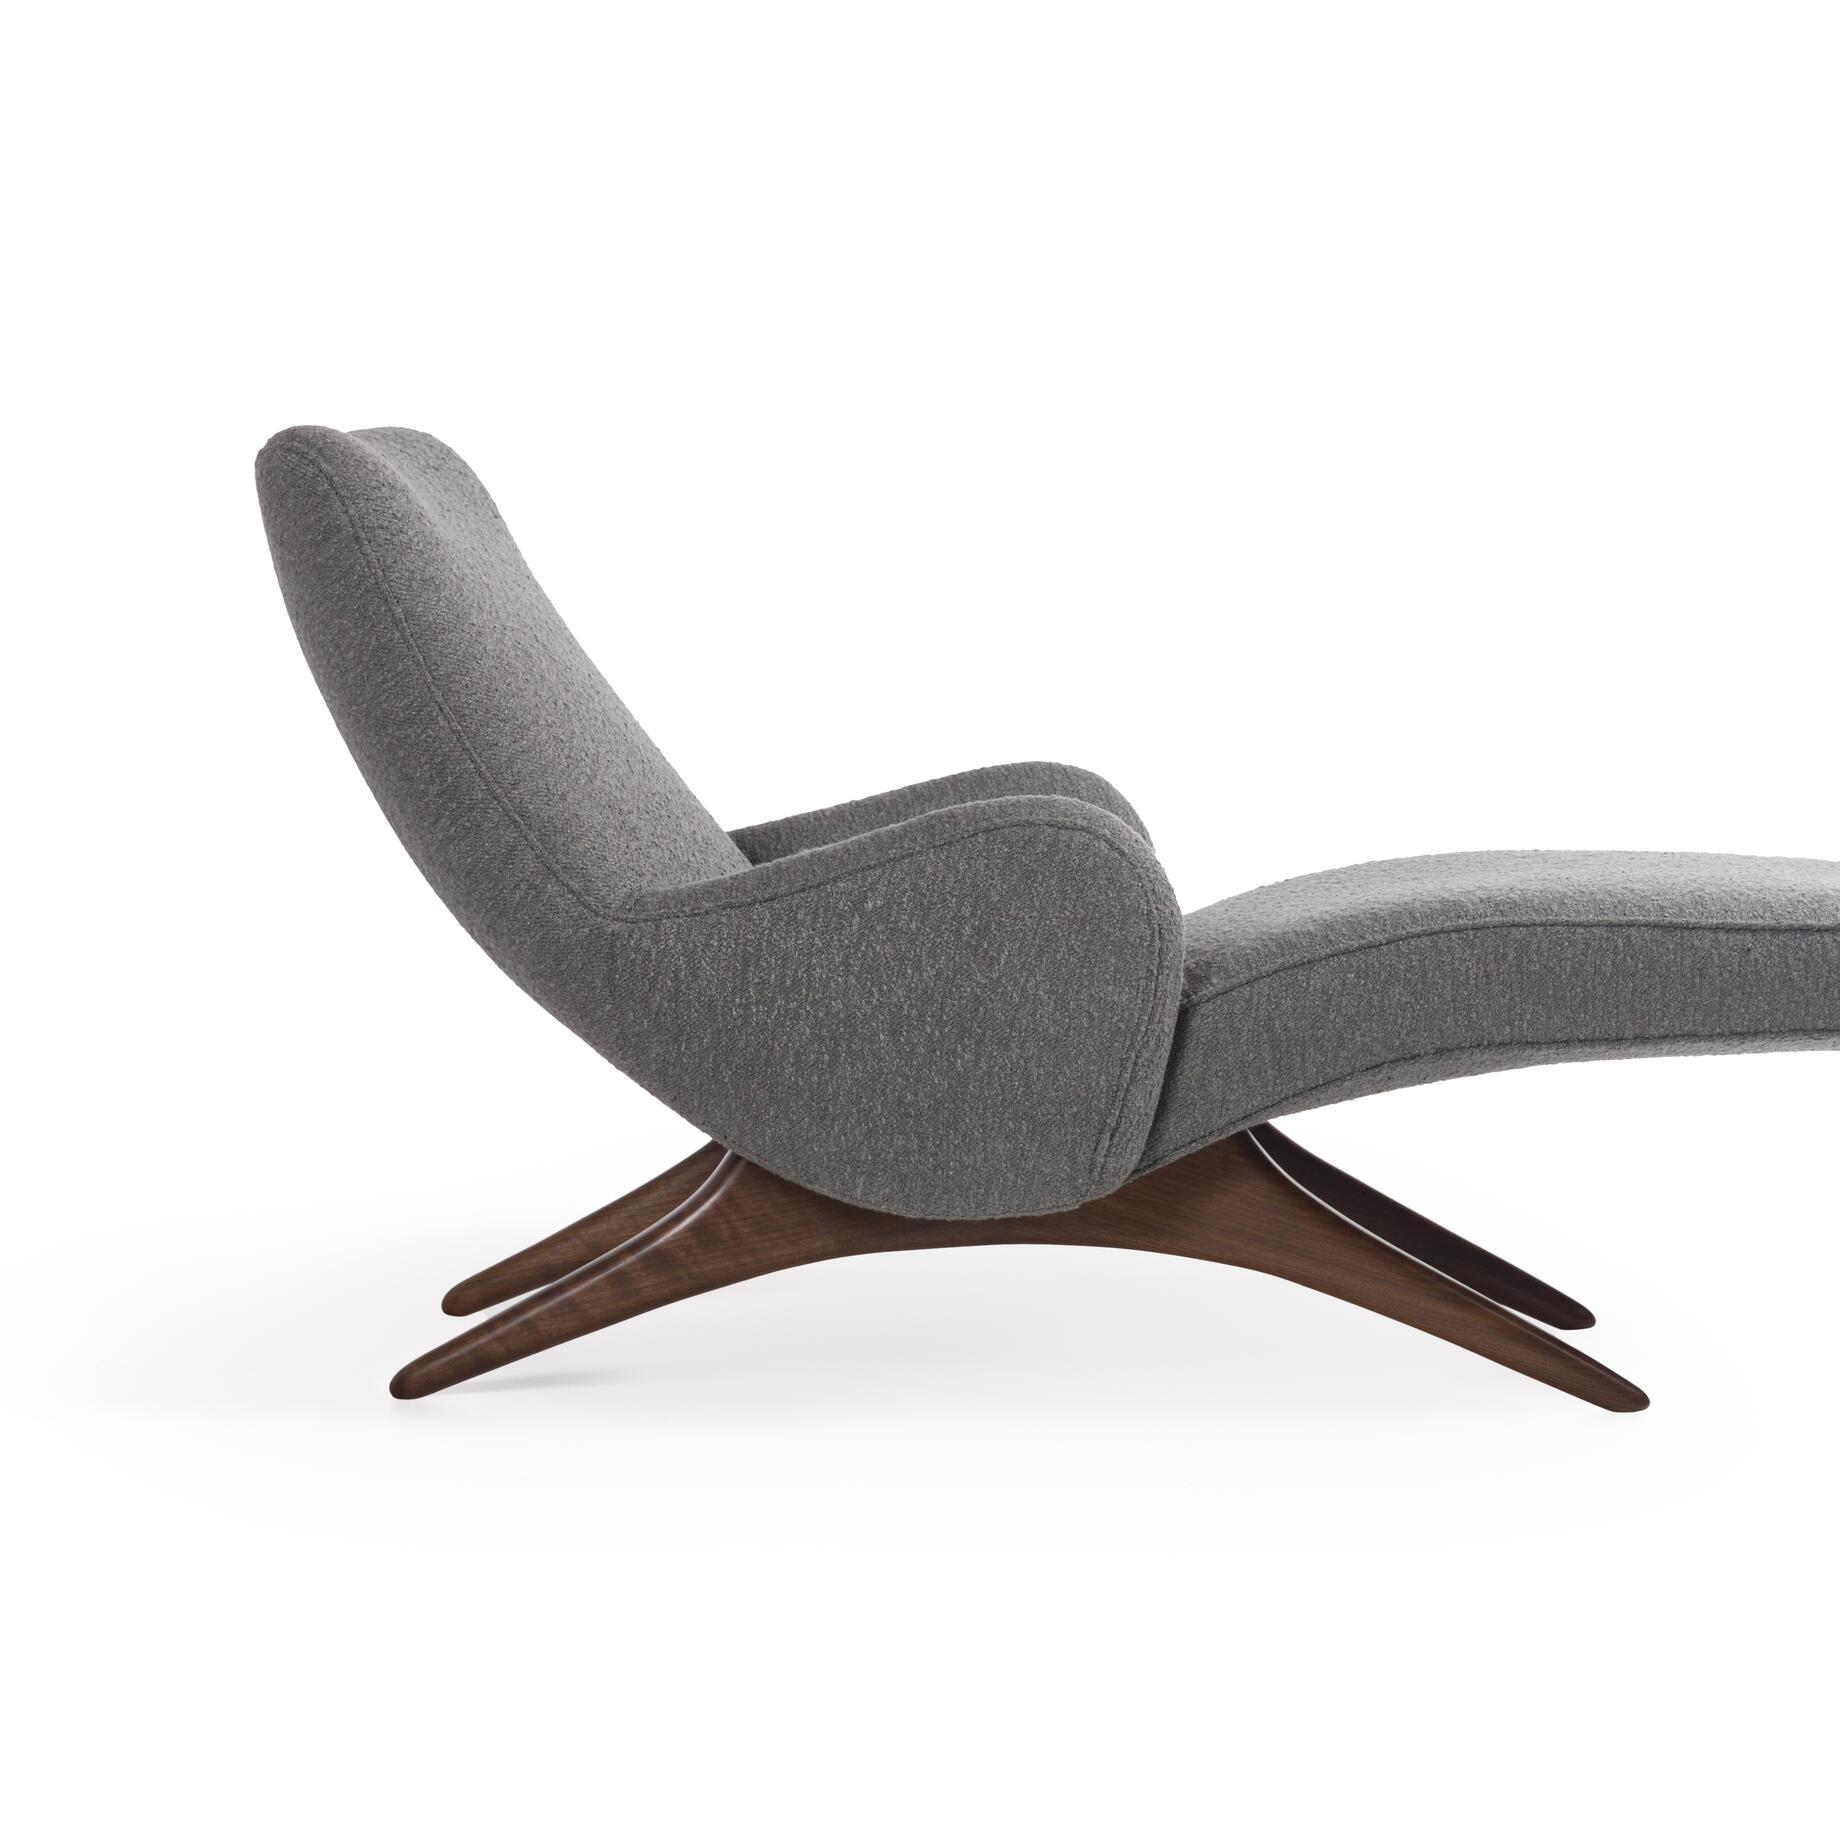 Contour Chaise Lounge | HOLLY HUNT